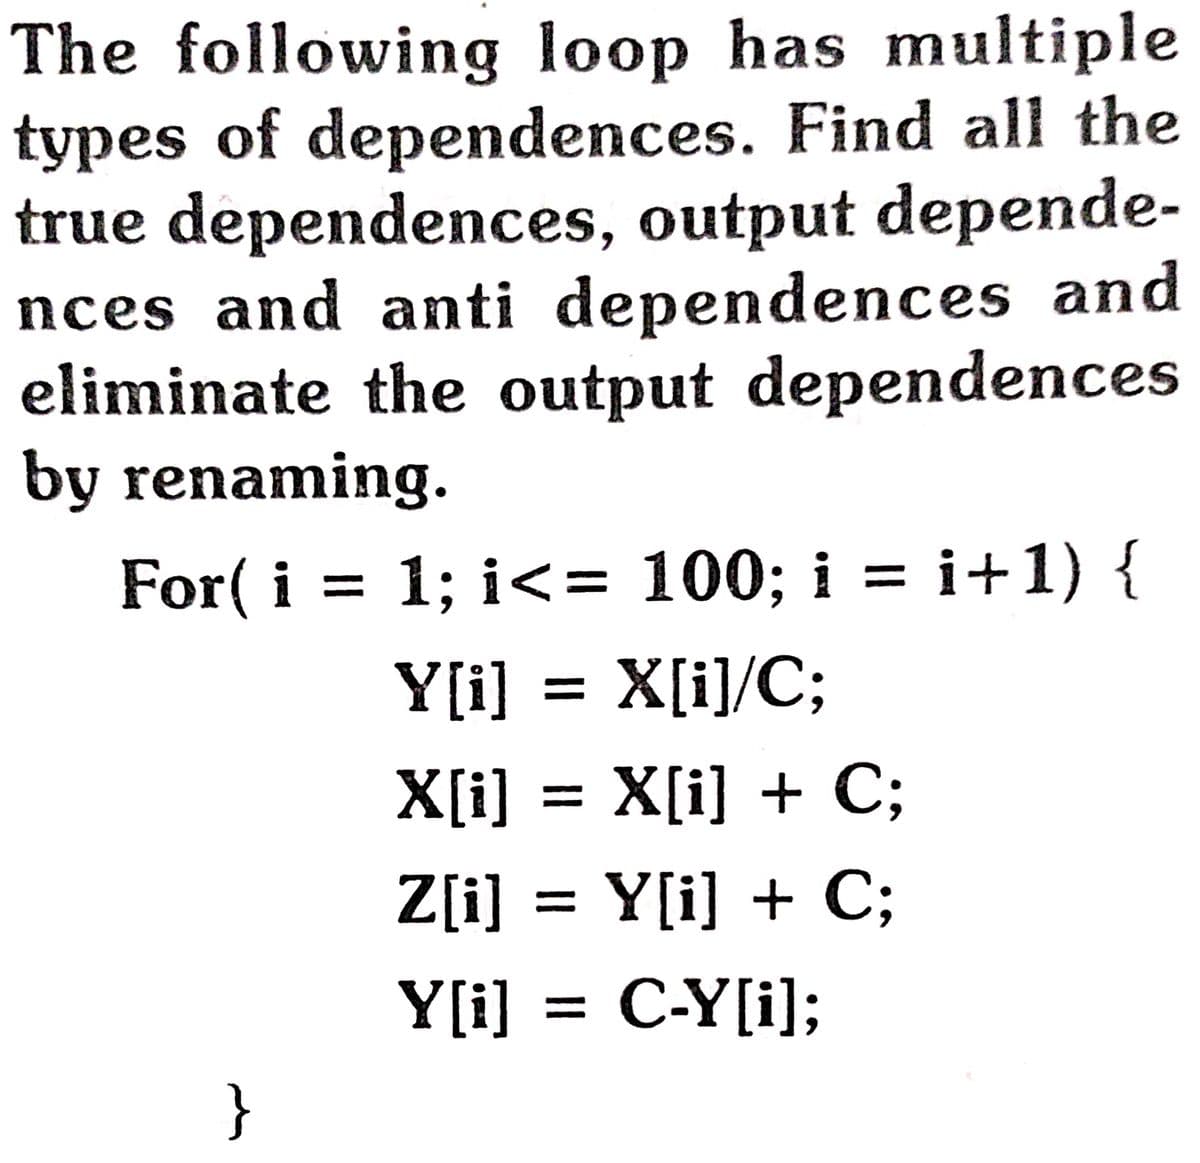 The following loop has multiple
types of dependences. Find all the
true dependences, output depende-
nces and anti dependences and
eliminate the output dependences
by renaming.
For( i 3D 1; i- 100; i 3D і+1) {
Y[i] = X[i]/C;
X[i] = X[i] + C;
Z[i] = Y[i] + C;
%3D
Y[i] = C-Y[i];
%3|
}
